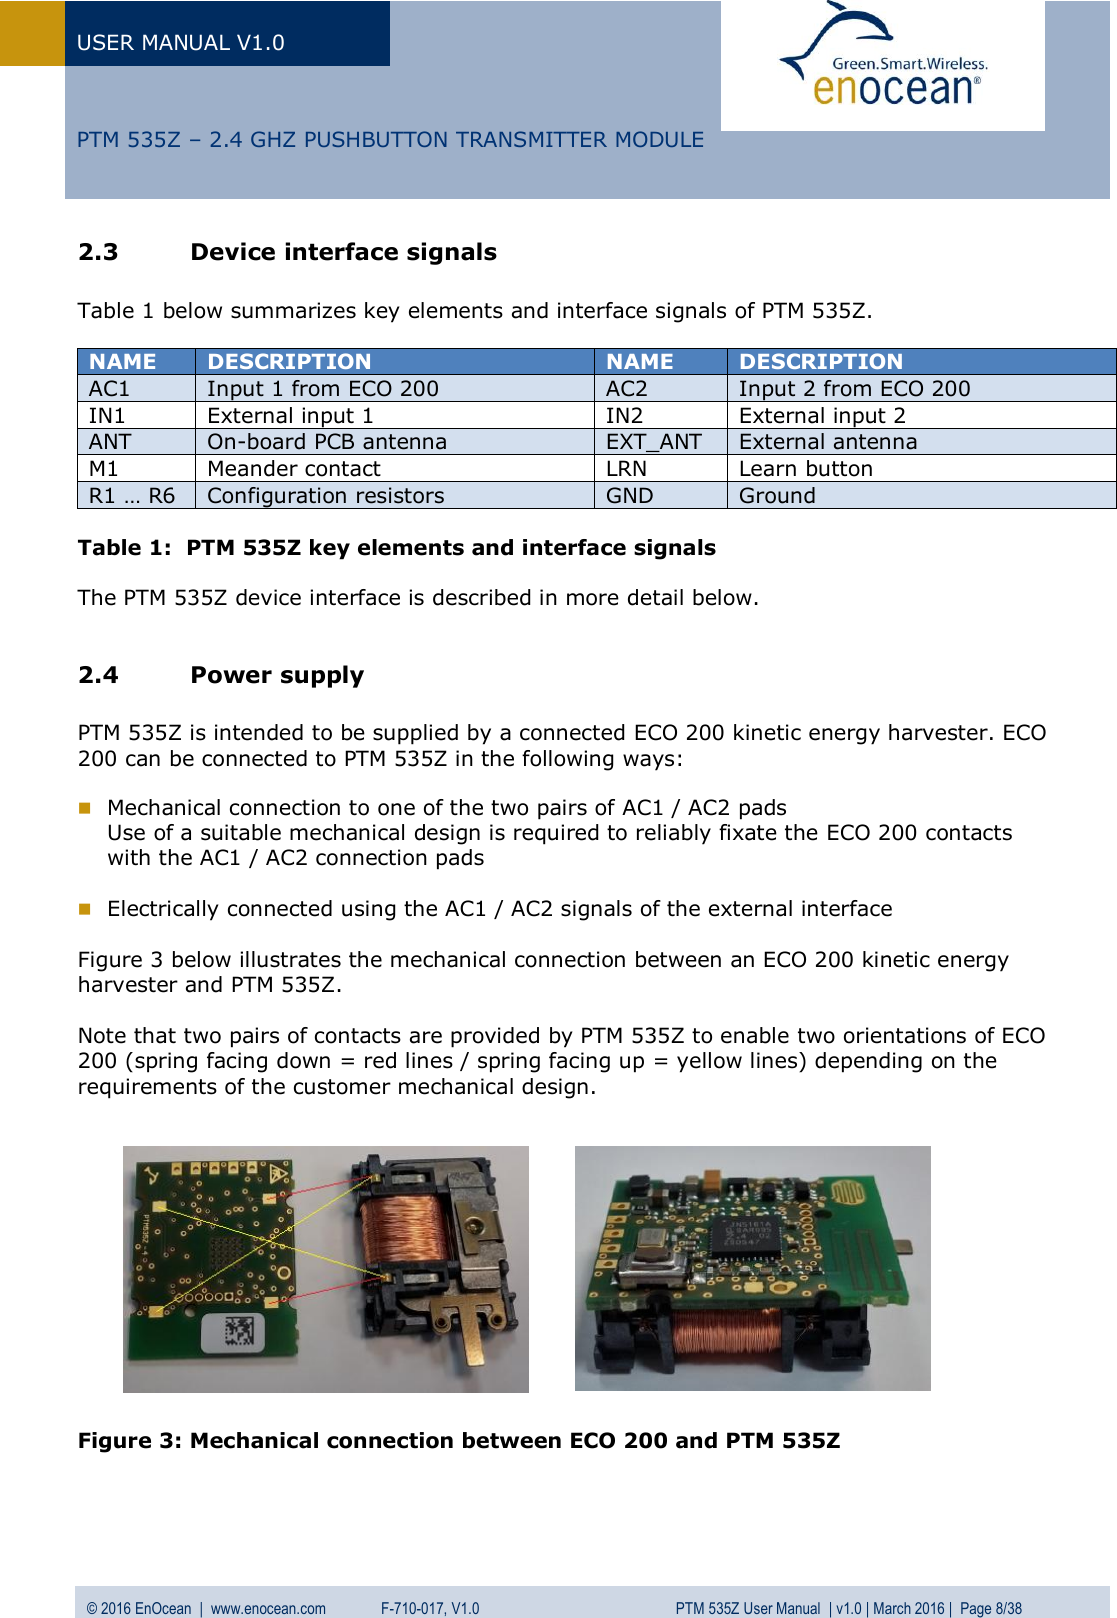 USER MANUAL V1.0   © 2016 EnOcean  |  www.enocean.com   F-710-017, V1.0          PTM 535Z User Manual  | v1.0 | March 2016 |  Page 8/38   PTM 535Z – 2.4 GHZ PUSHBUTTON TRANSMITTER MODULE 2.3 Device interface signals  Table 1 below summarizes key elements and interface signals of PTM 535Z.  NAME  DESCRIPTION  NAME  DESCRIPTION  AC1  Input 1 from ECO 200  AC2  Input 2 from ECO 200 IN1 External input 1 IN2 External input 2 ANT On-board PCB antenna  EXT_ANT External antenna  M1 Meander contact LRN Learn button R1 … R6 Configuration resistors GND Ground  Table 1:  PTM 535Z key elements and interface signals  The PTM 535Z device interface is described in more detail below.  2.4 Power supply   PTM 535Z is intended to be supplied by a connected ECO 200 kinetic energy harvester. ECO 200 can be connected to PTM 535Z in the following ways:   Mechanical connection to one of the two pairs of AC1 / AC2 pads Use of a suitable mechanical design is required to reliably fixate the ECO 200 contacts with the AC1 / AC2 connection pads   Electrically connected using the AC1 / AC2 signals of the external interface  Figure 3 below illustrates the mechanical connection between an ECO 200 kinetic energy harvester and PTM 535Z.   Note that two pairs of contacts are provided by PTM 535Z to enable two orientations of ECO 200 (spring facing down = red lines / spring facing up = yellow lines) depending on the requirements of the customer mechanical design.              Figure 3: Mechanical connection between ECO 200 and PTM 535Z   